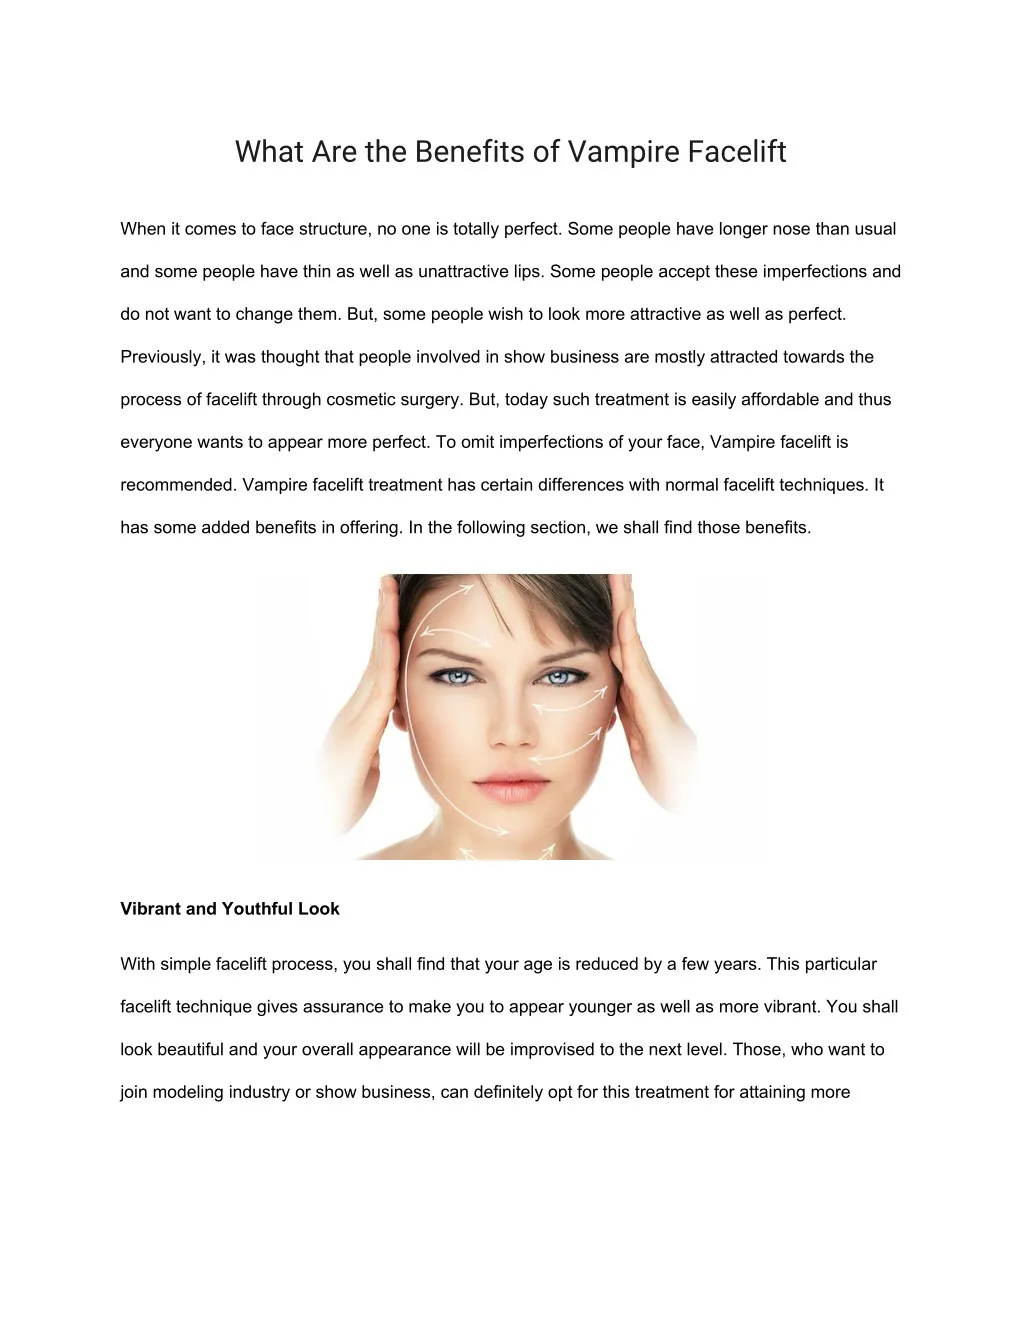 what are the benefits of vampire facelift